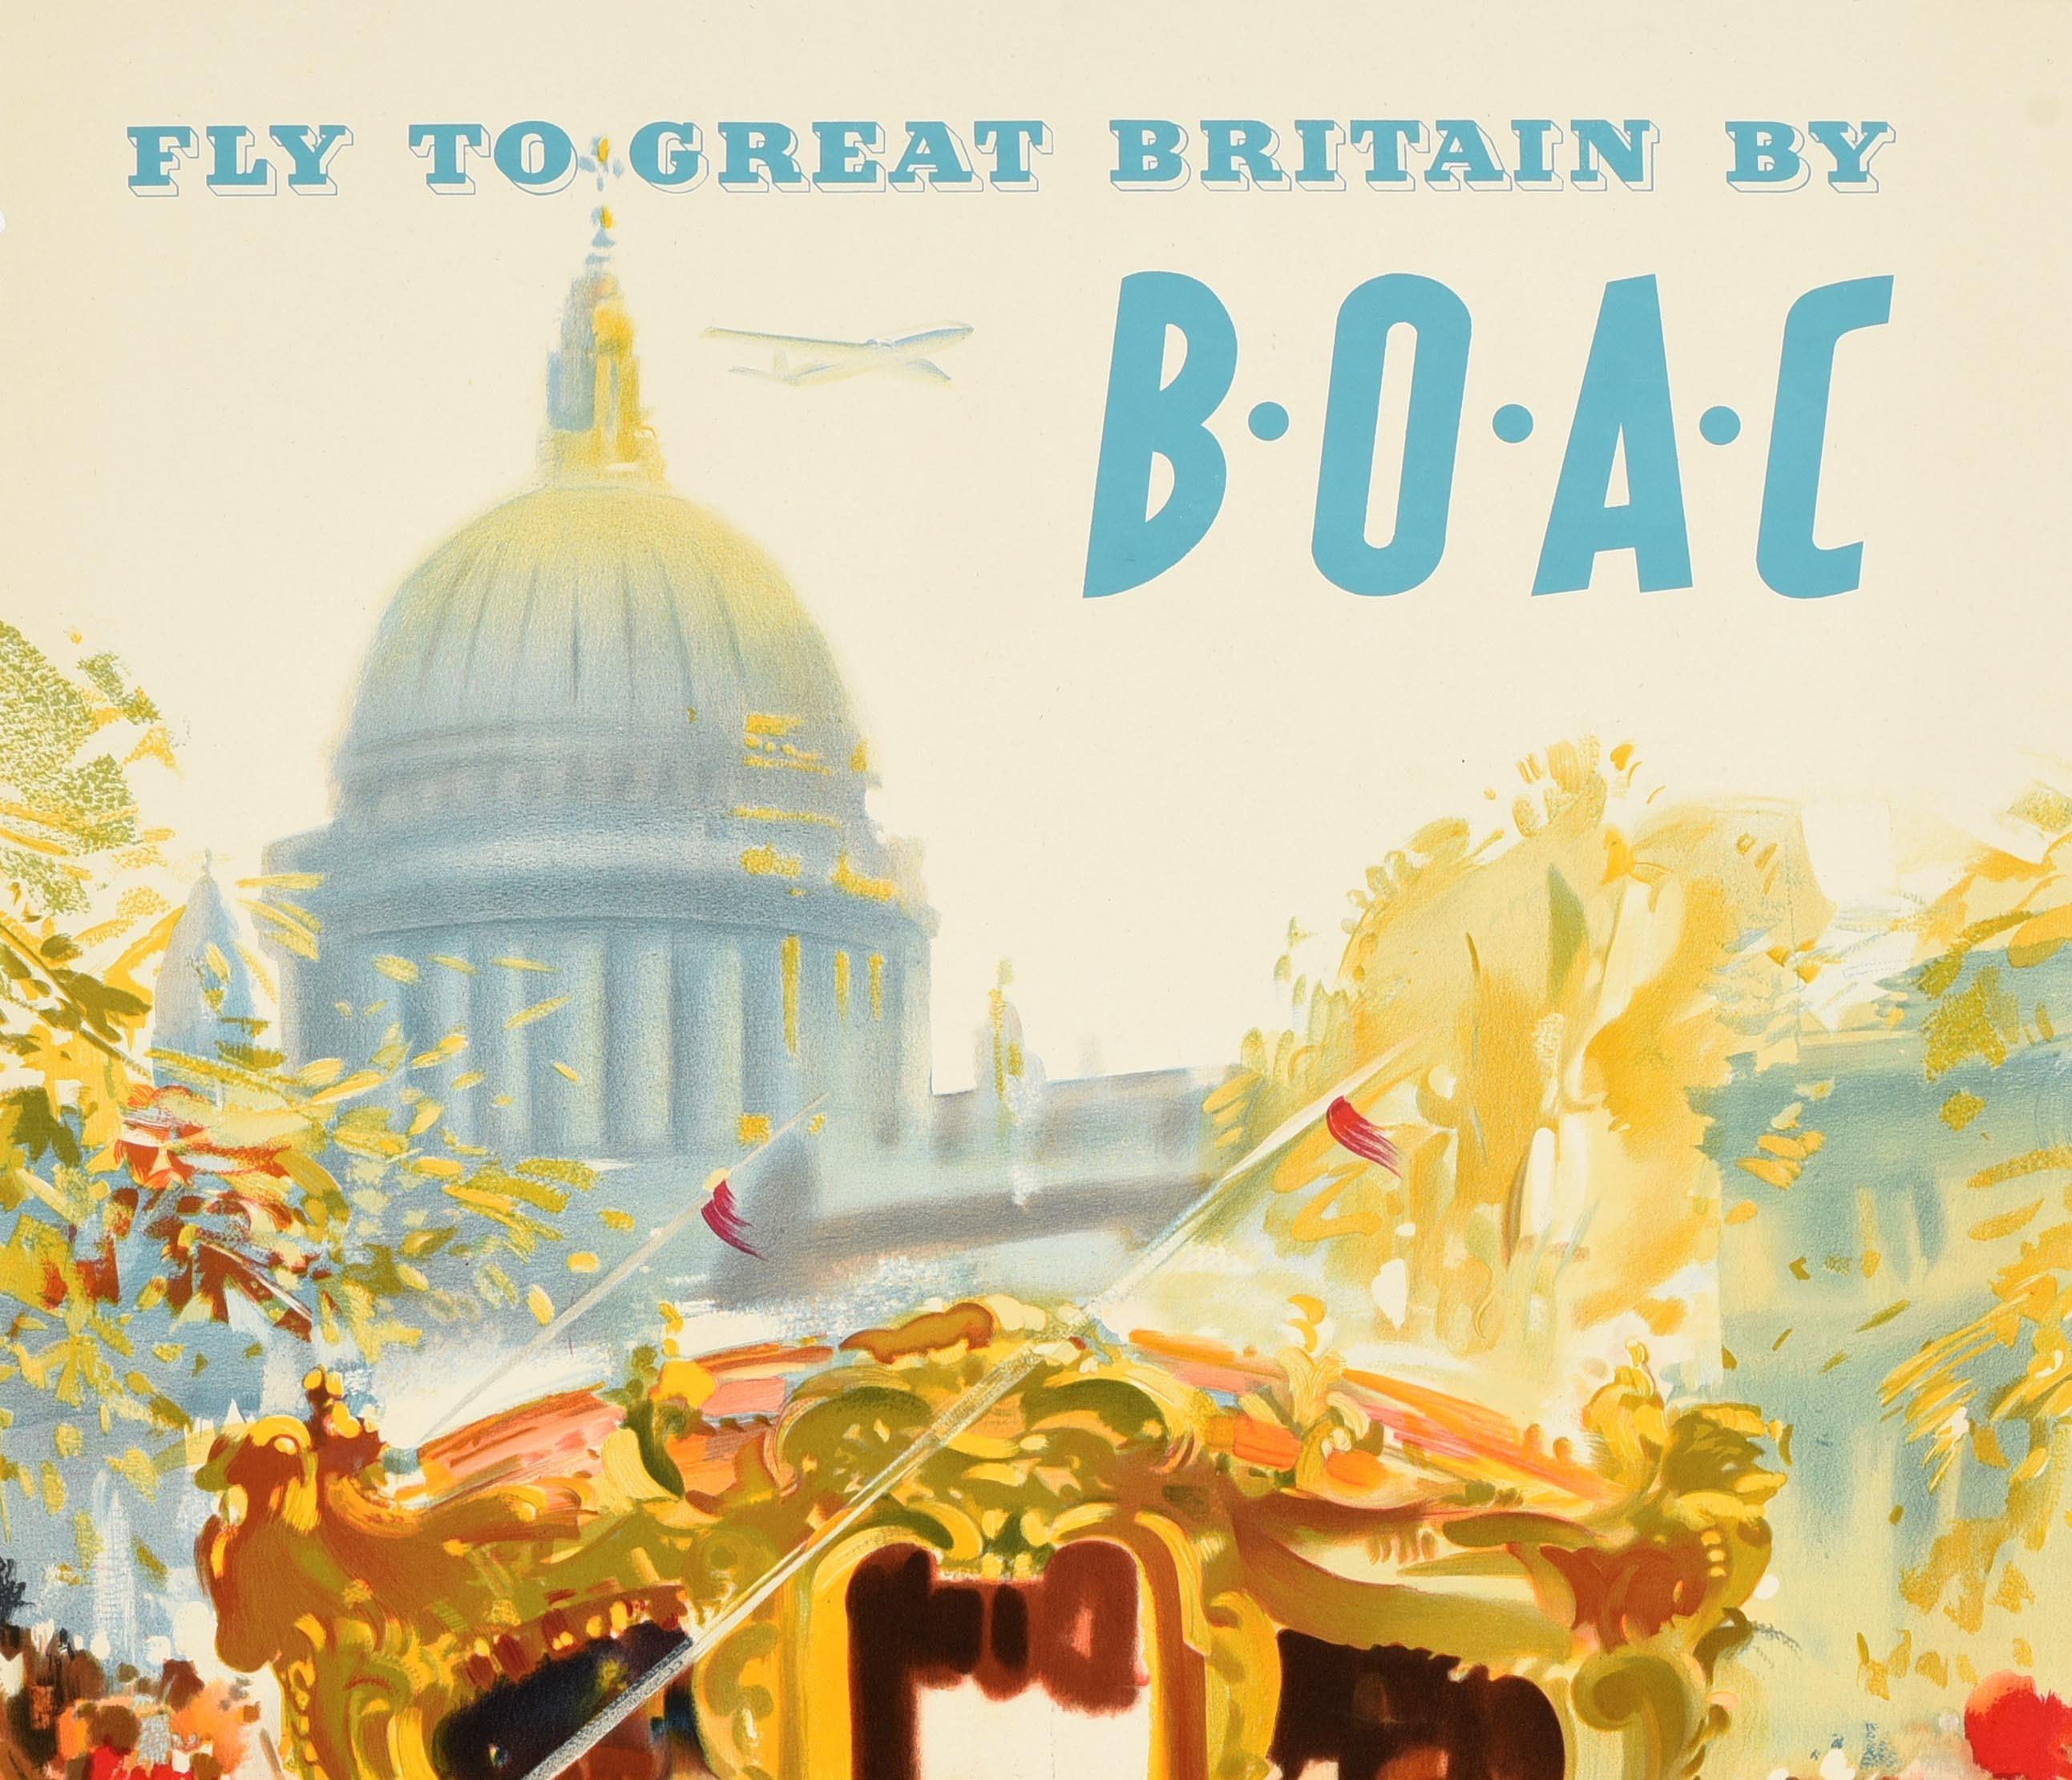 Original Vintage Poster Great Britain BOAC Lord Mayor's Show St Paul's Cathedral - Print by Frank Wootton